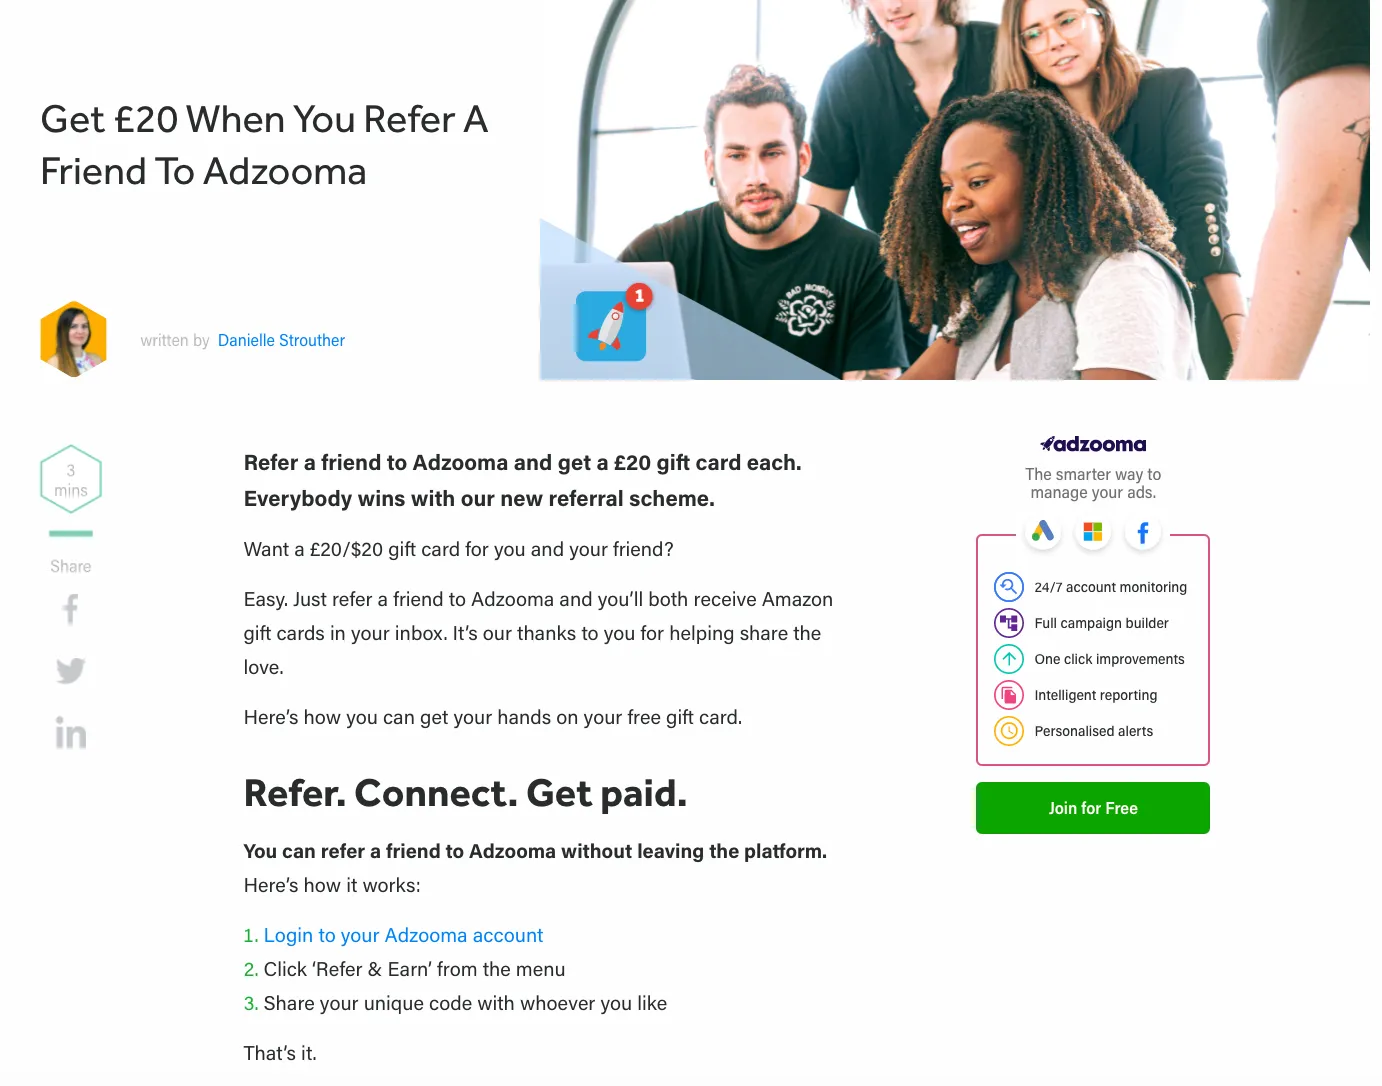 Adzooma announced the launch of their referral program through a blog post